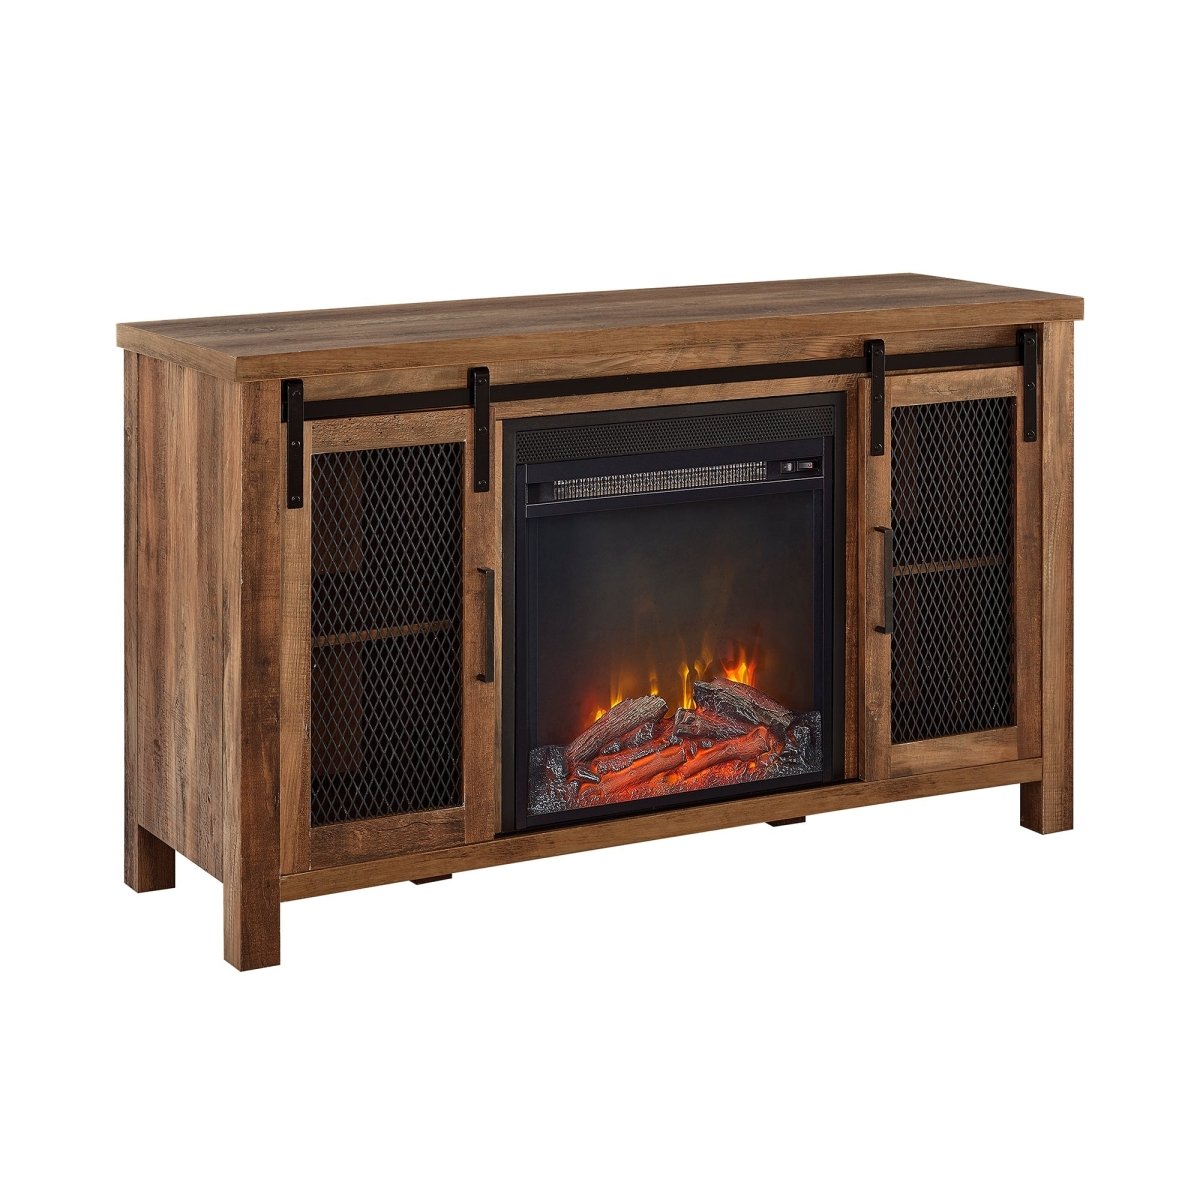 Walker Edison Grant 48" Rustic Farmhouse Fireplace TV Stand - lily & onyx